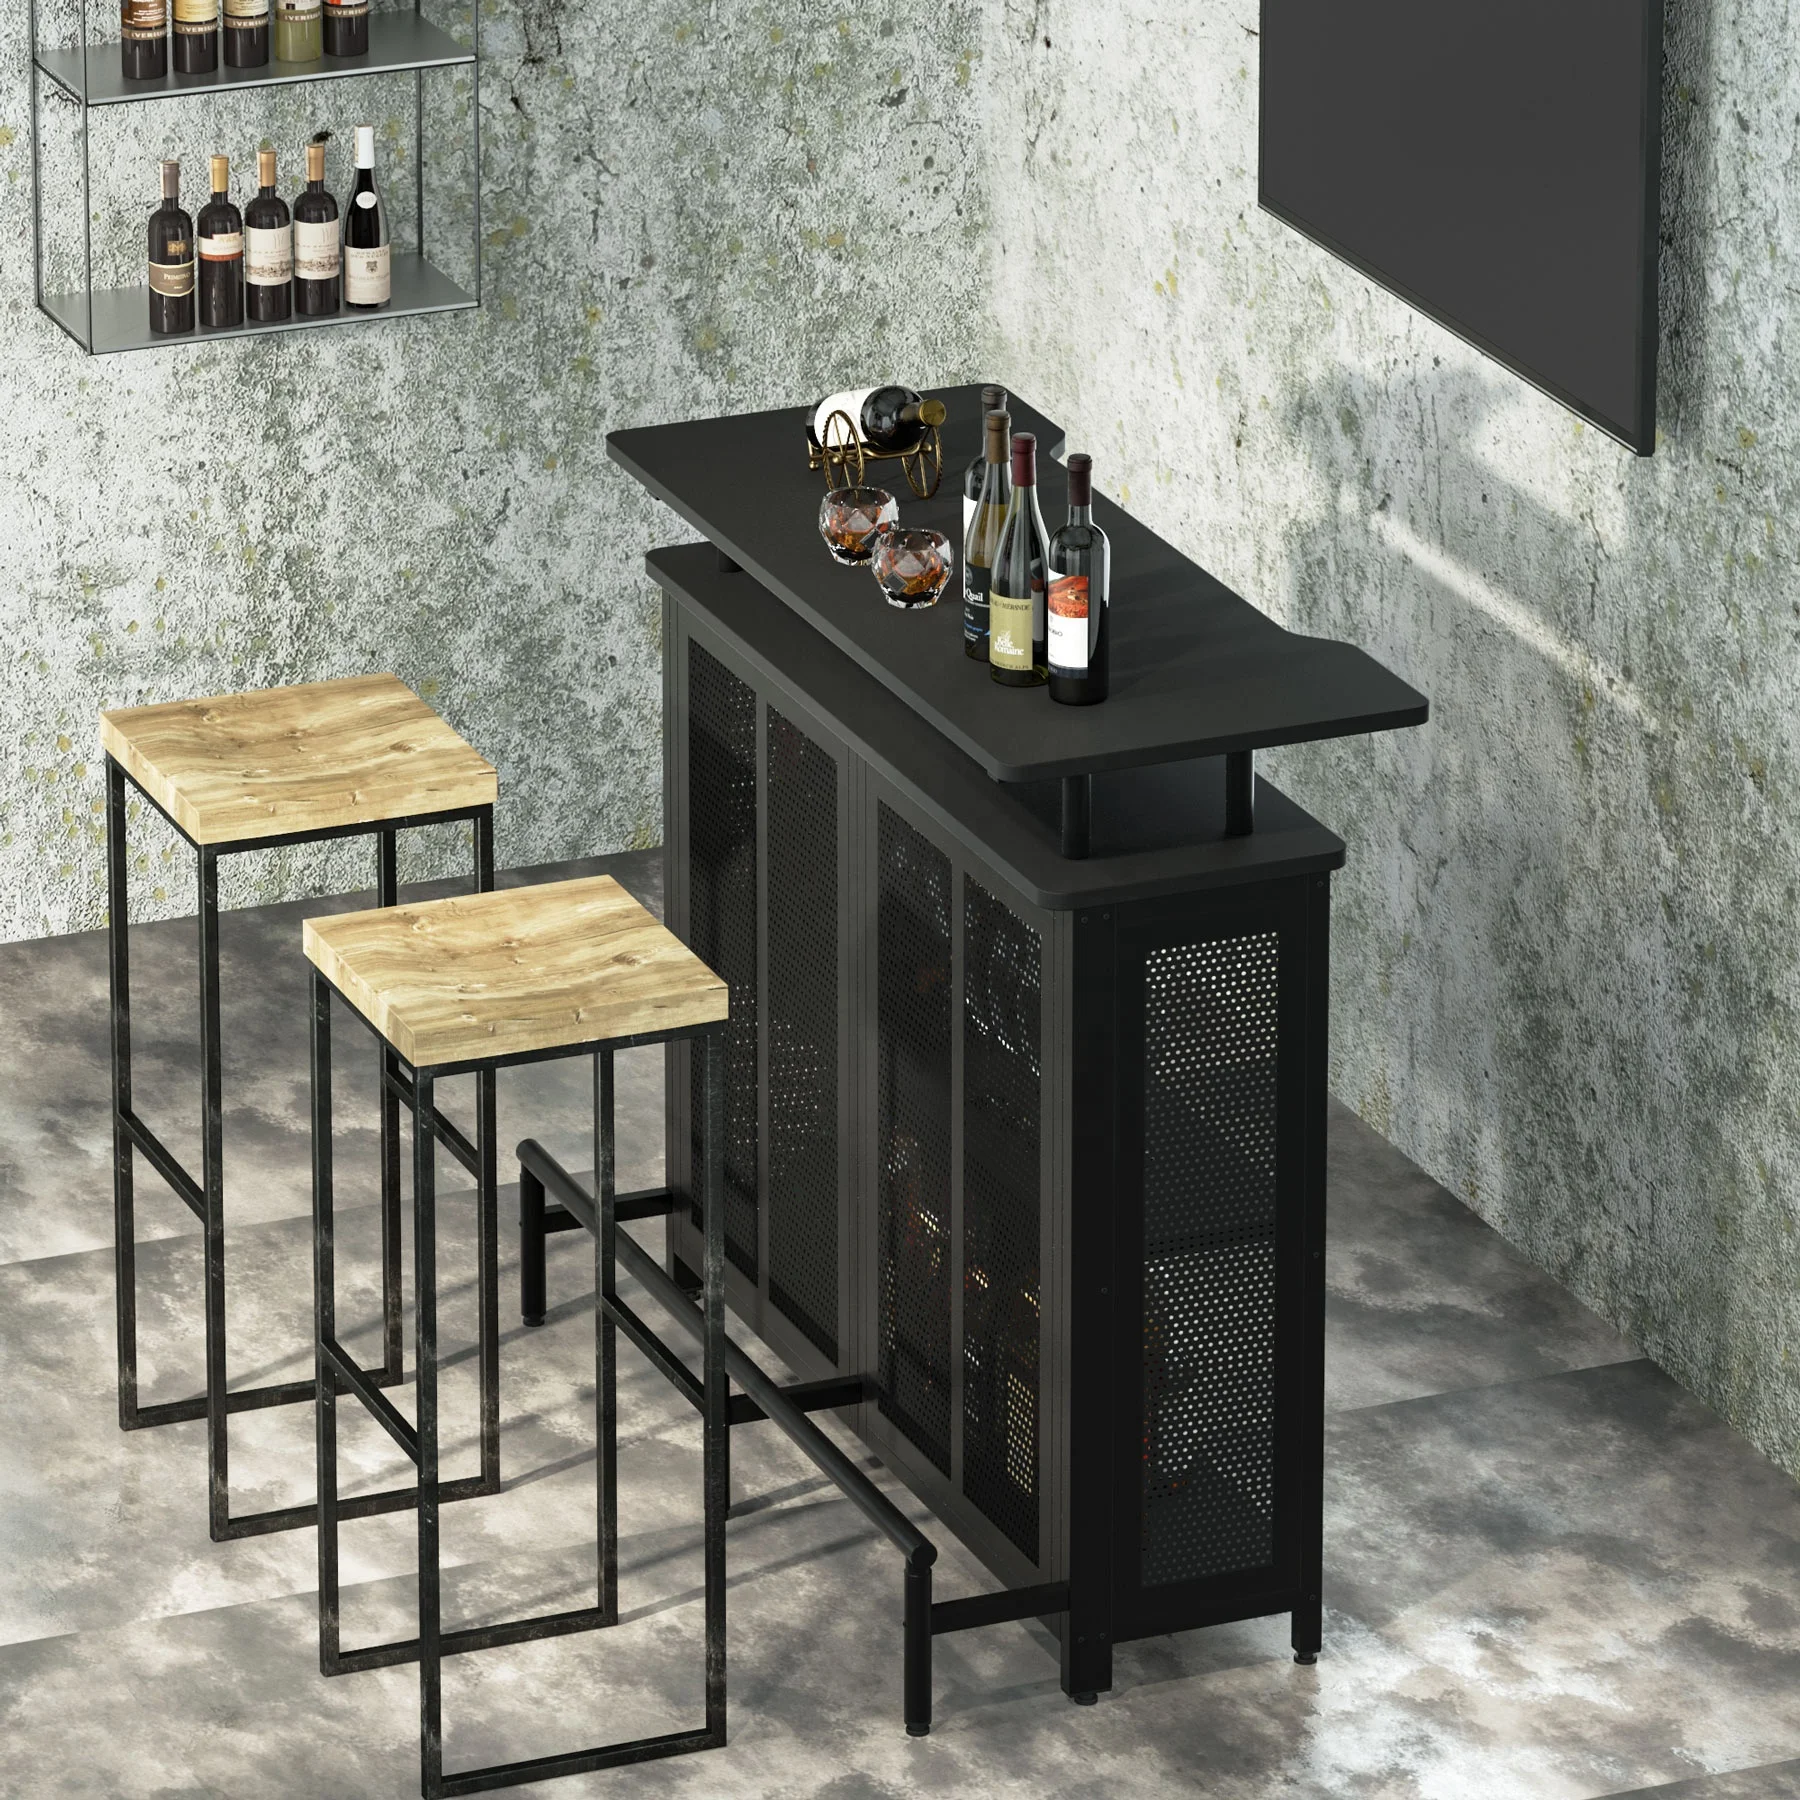 Tribesigns Furniture 3 tier Wine rack coffee bar table with storage shelves and glasses cabinet for holiday pub furniture